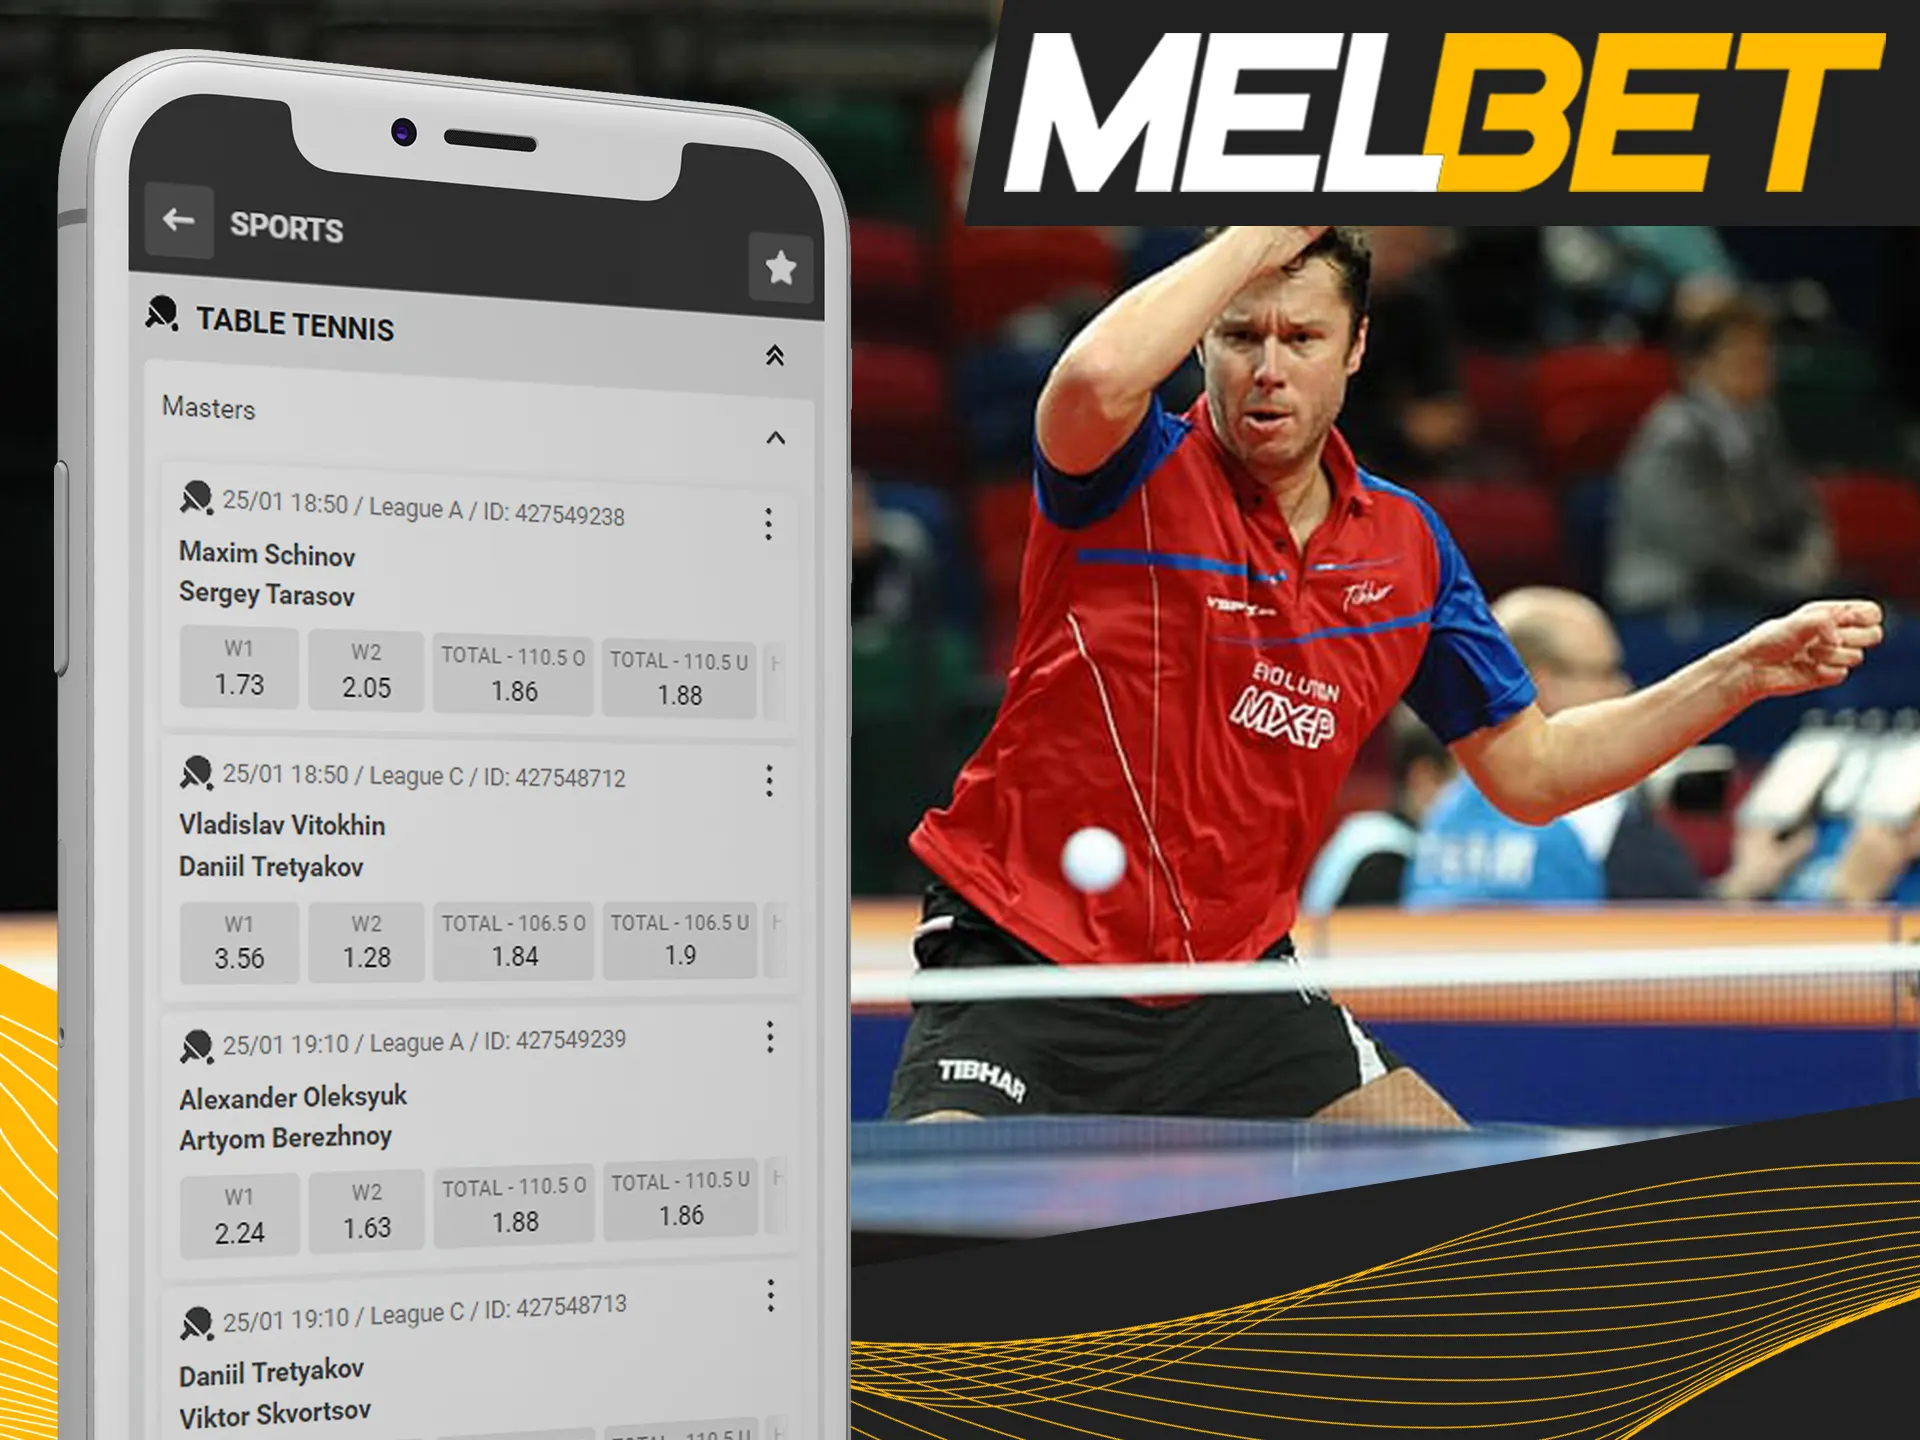 Melbet is a best place to bet on table tennis matches.